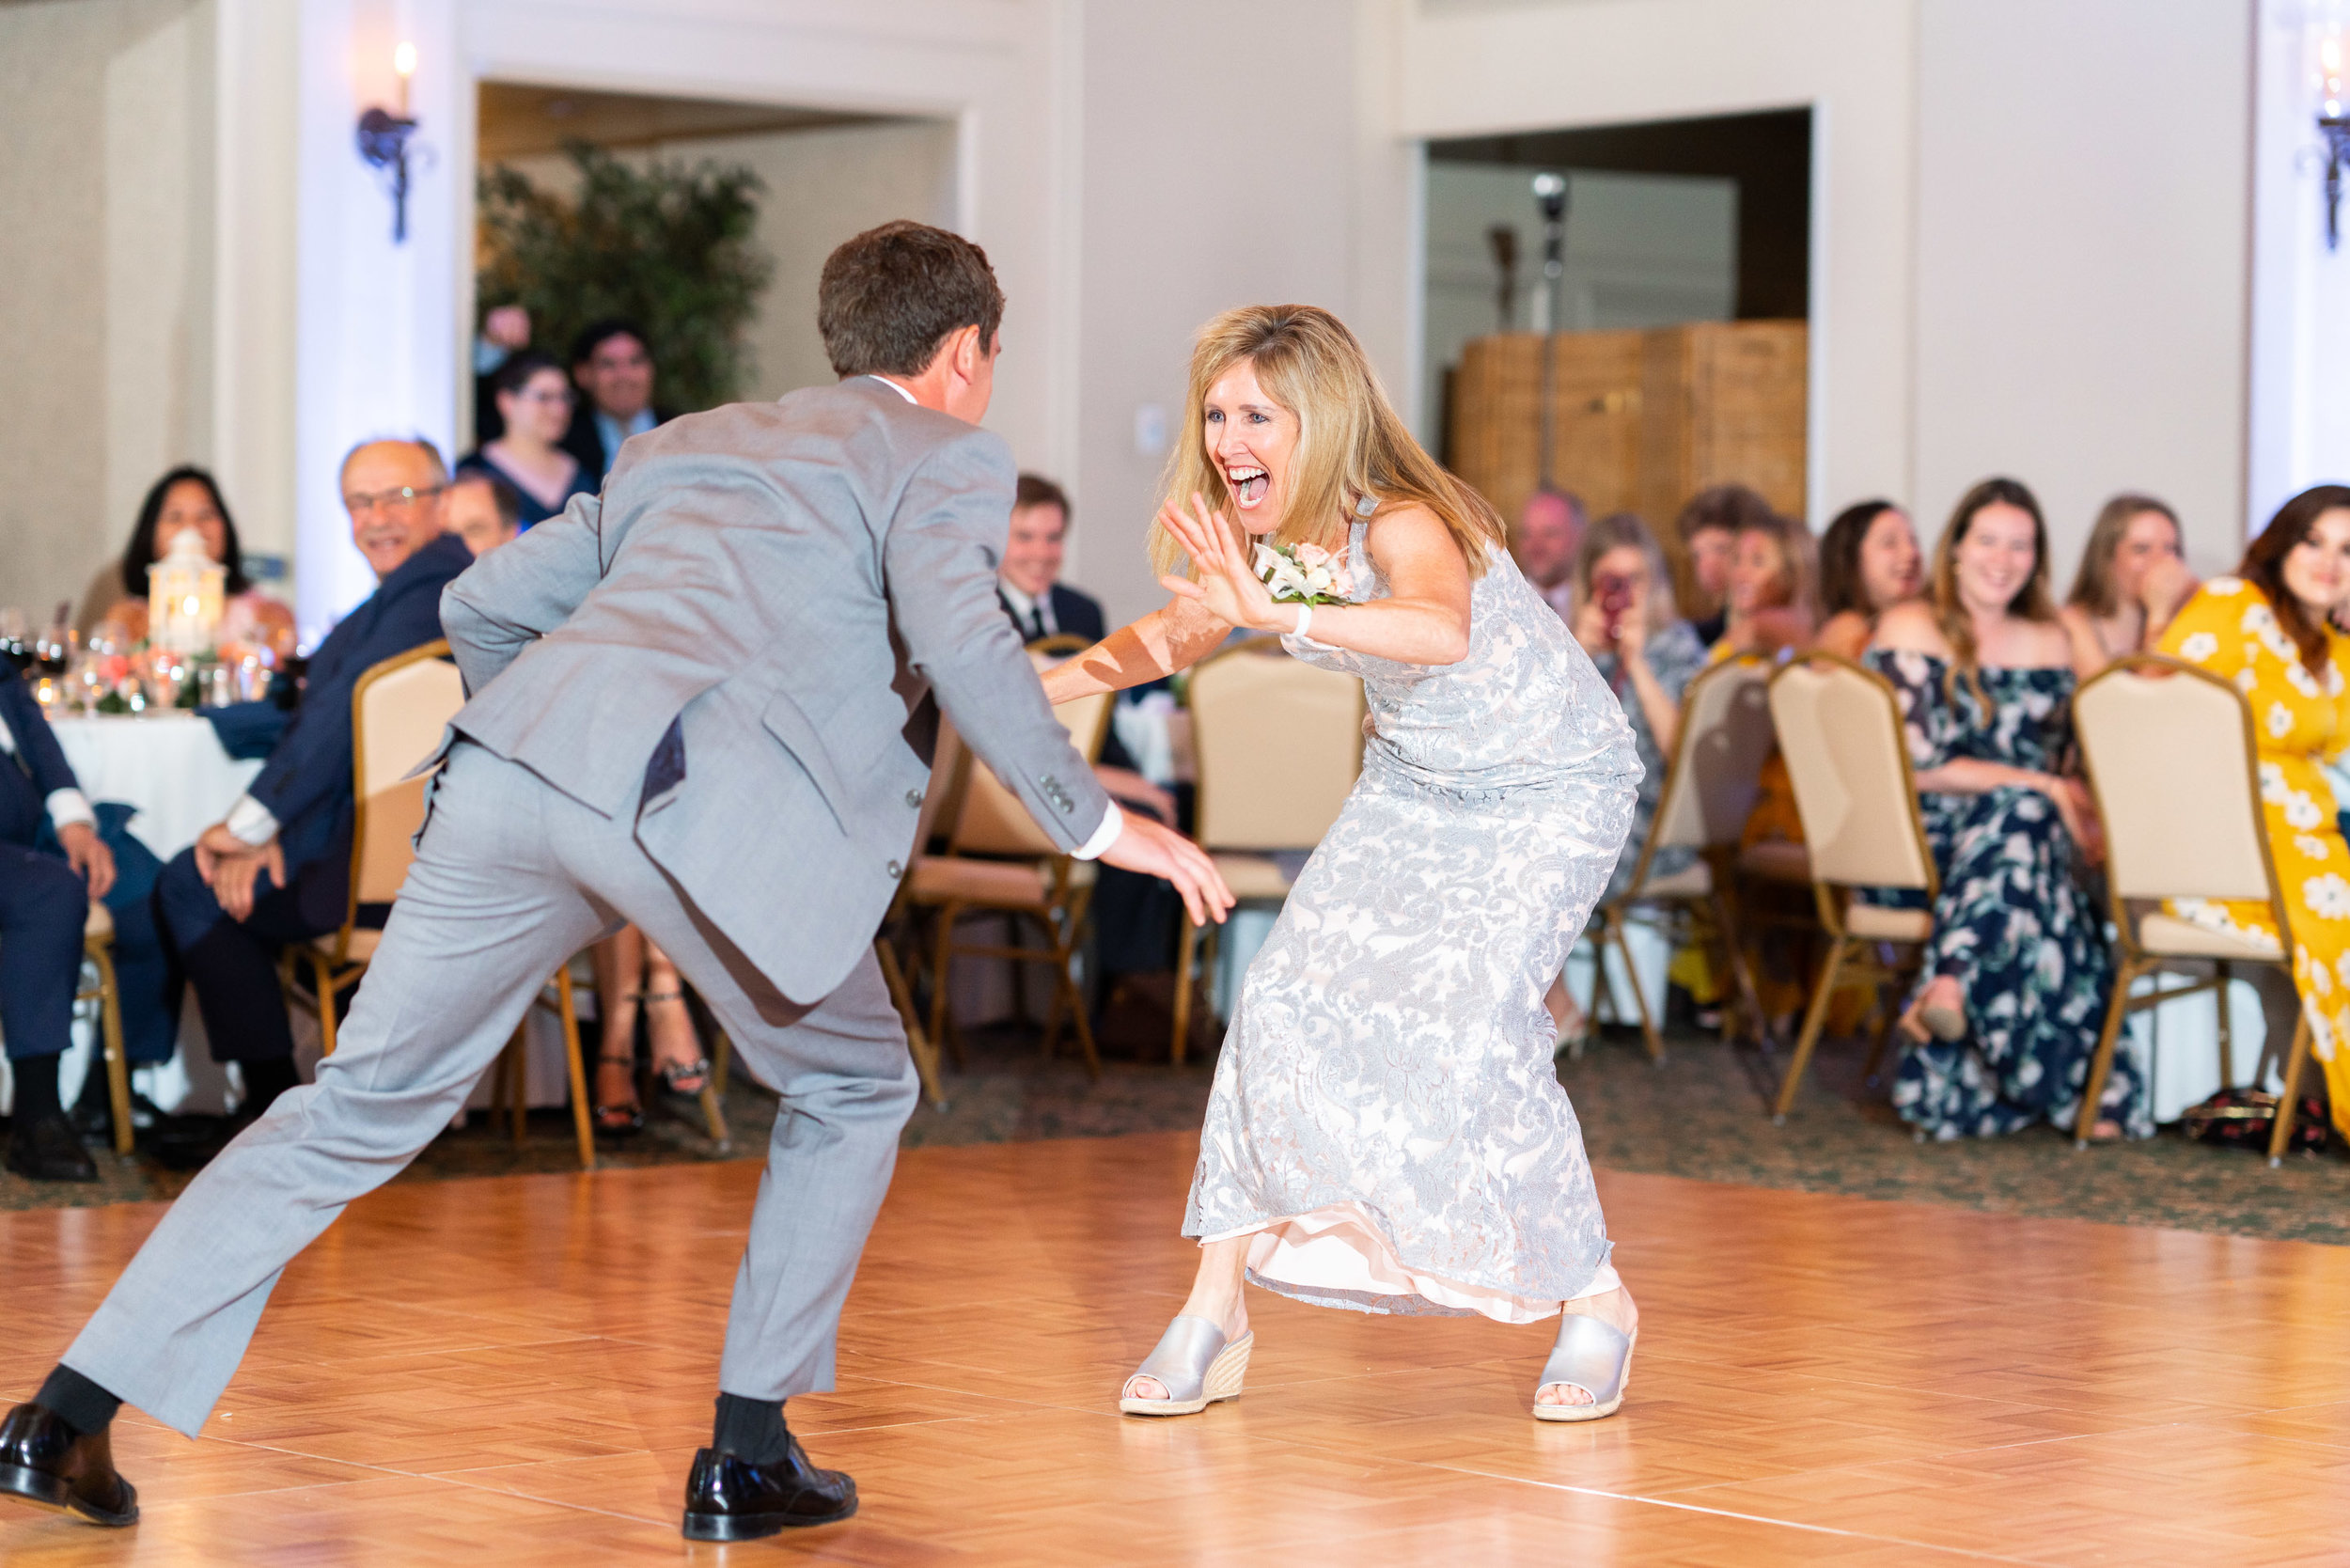 Mother and son dance at rehoboth beach country club reception hall with purple uplighting